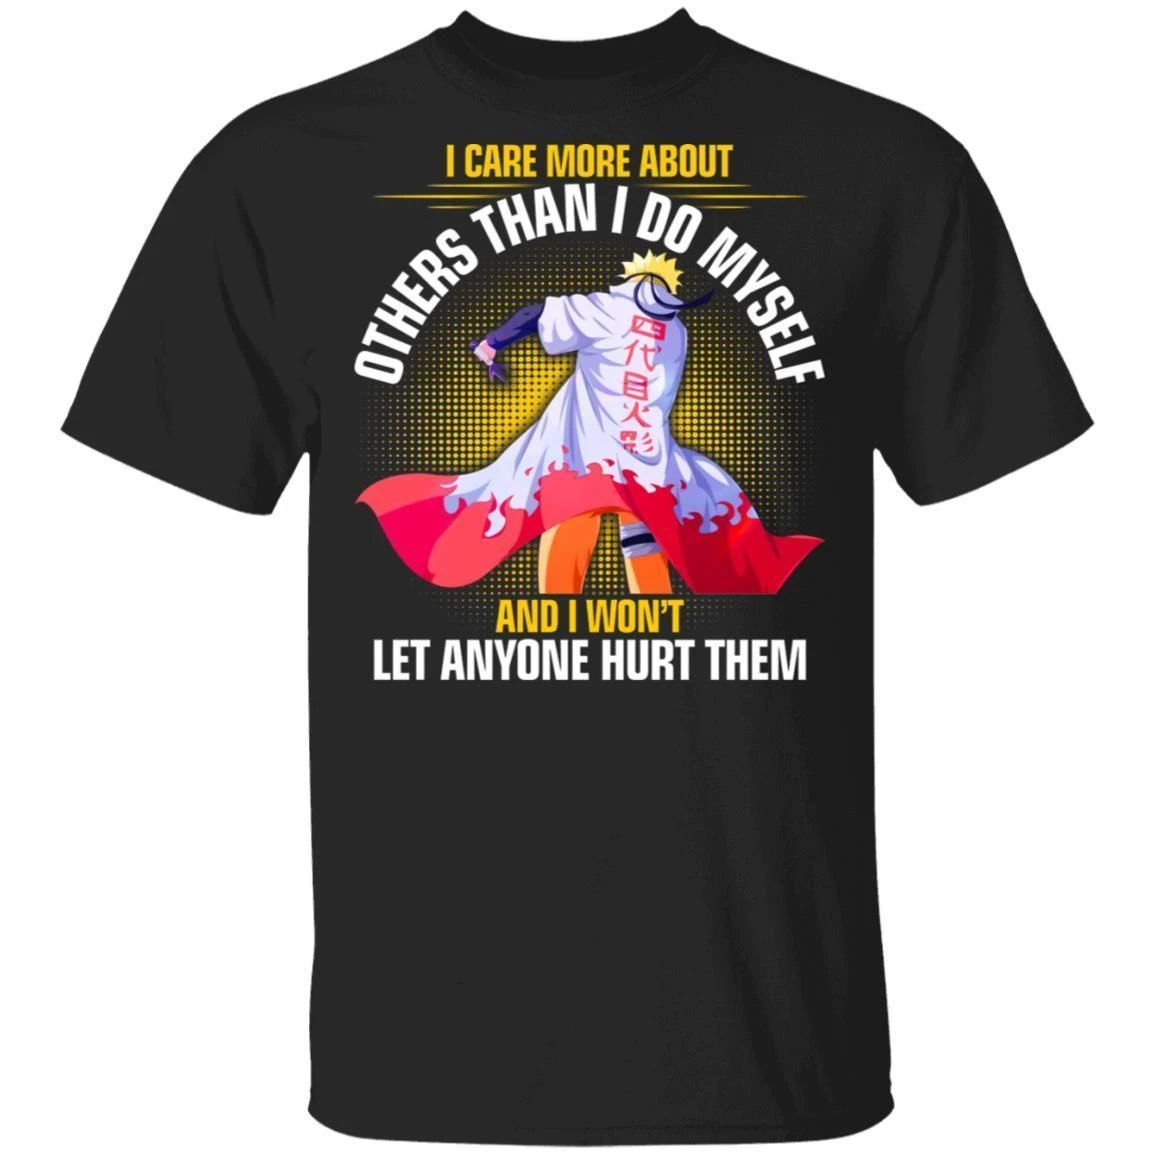 I Care More About Others Naruto T Shirt Naruto Anime Tee-Bounce Tee